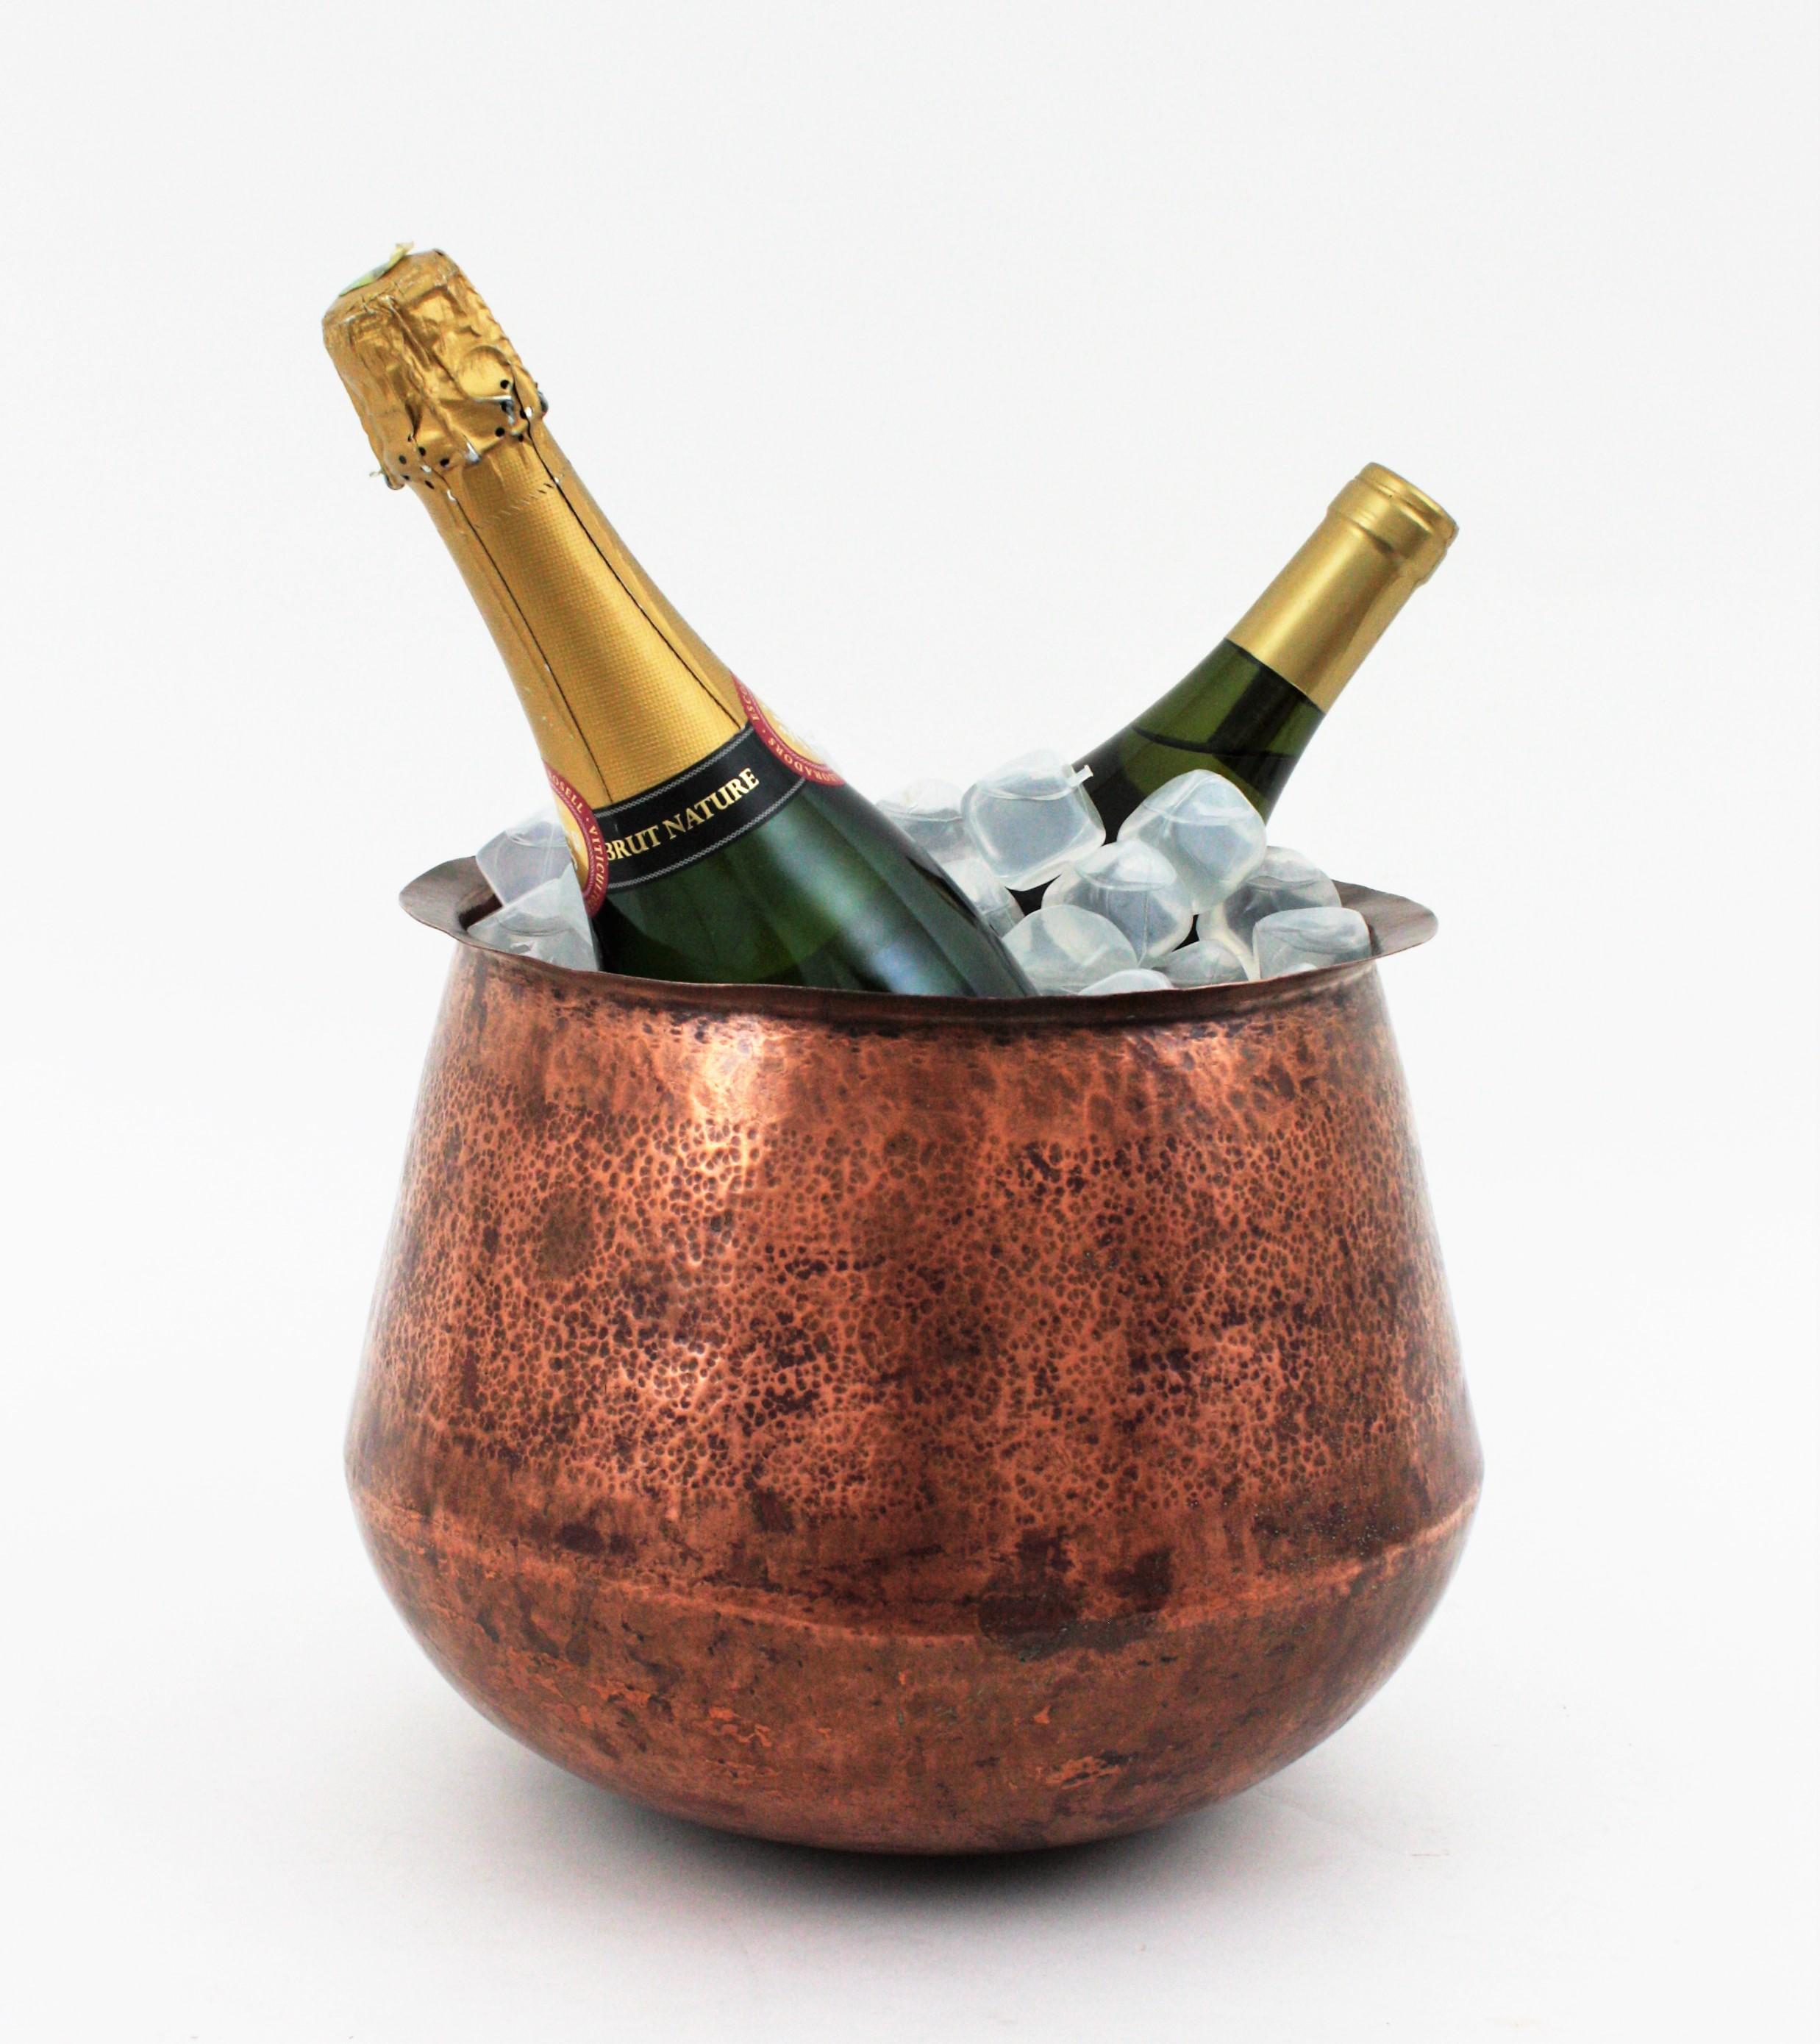 Copper vessell, wine cooler or planter, Spain, 1940s.
Swollen shape.
This hand-hammered copper vessel can be used as decorative centerpiece, fruit bowl, champagne cooler or planter. This traditional copper pot has a rustic taste. Beautiful hammer